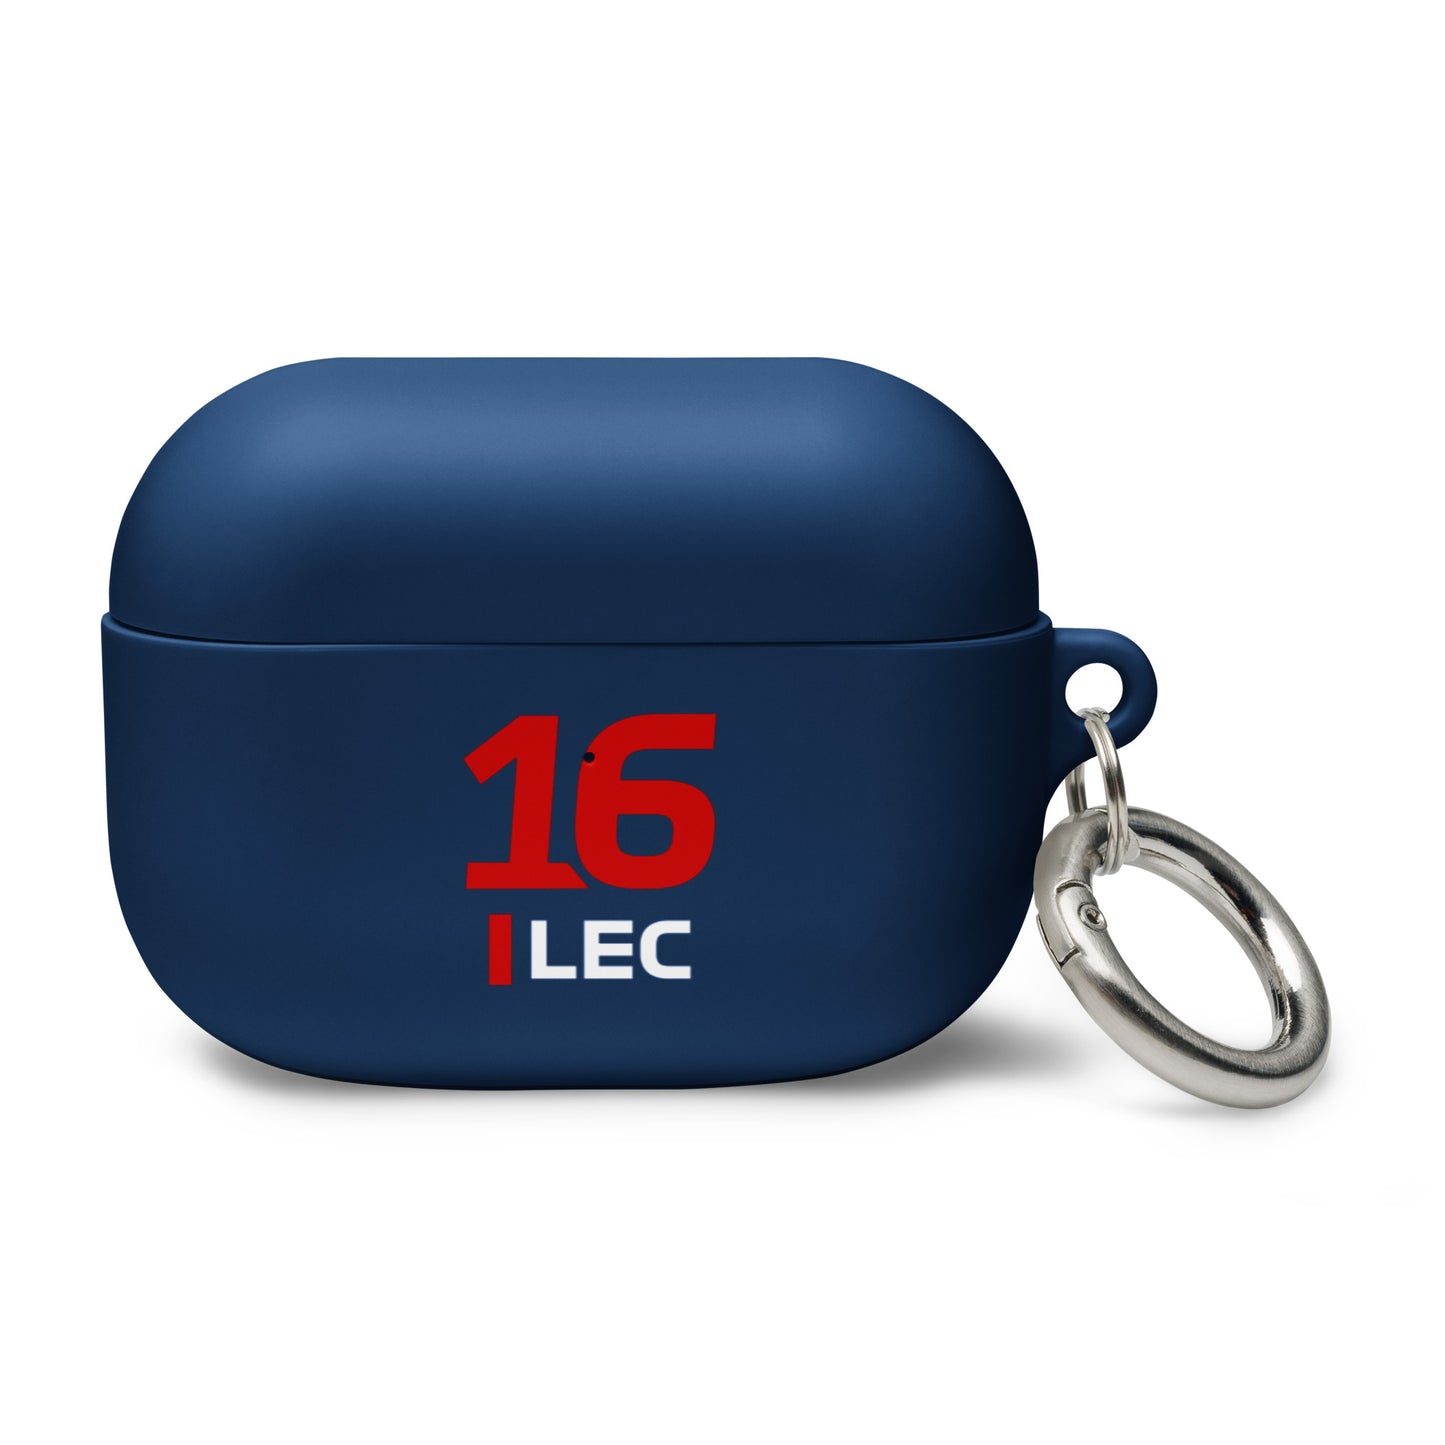 Charles Leclerc AirPods Case pro navy blue